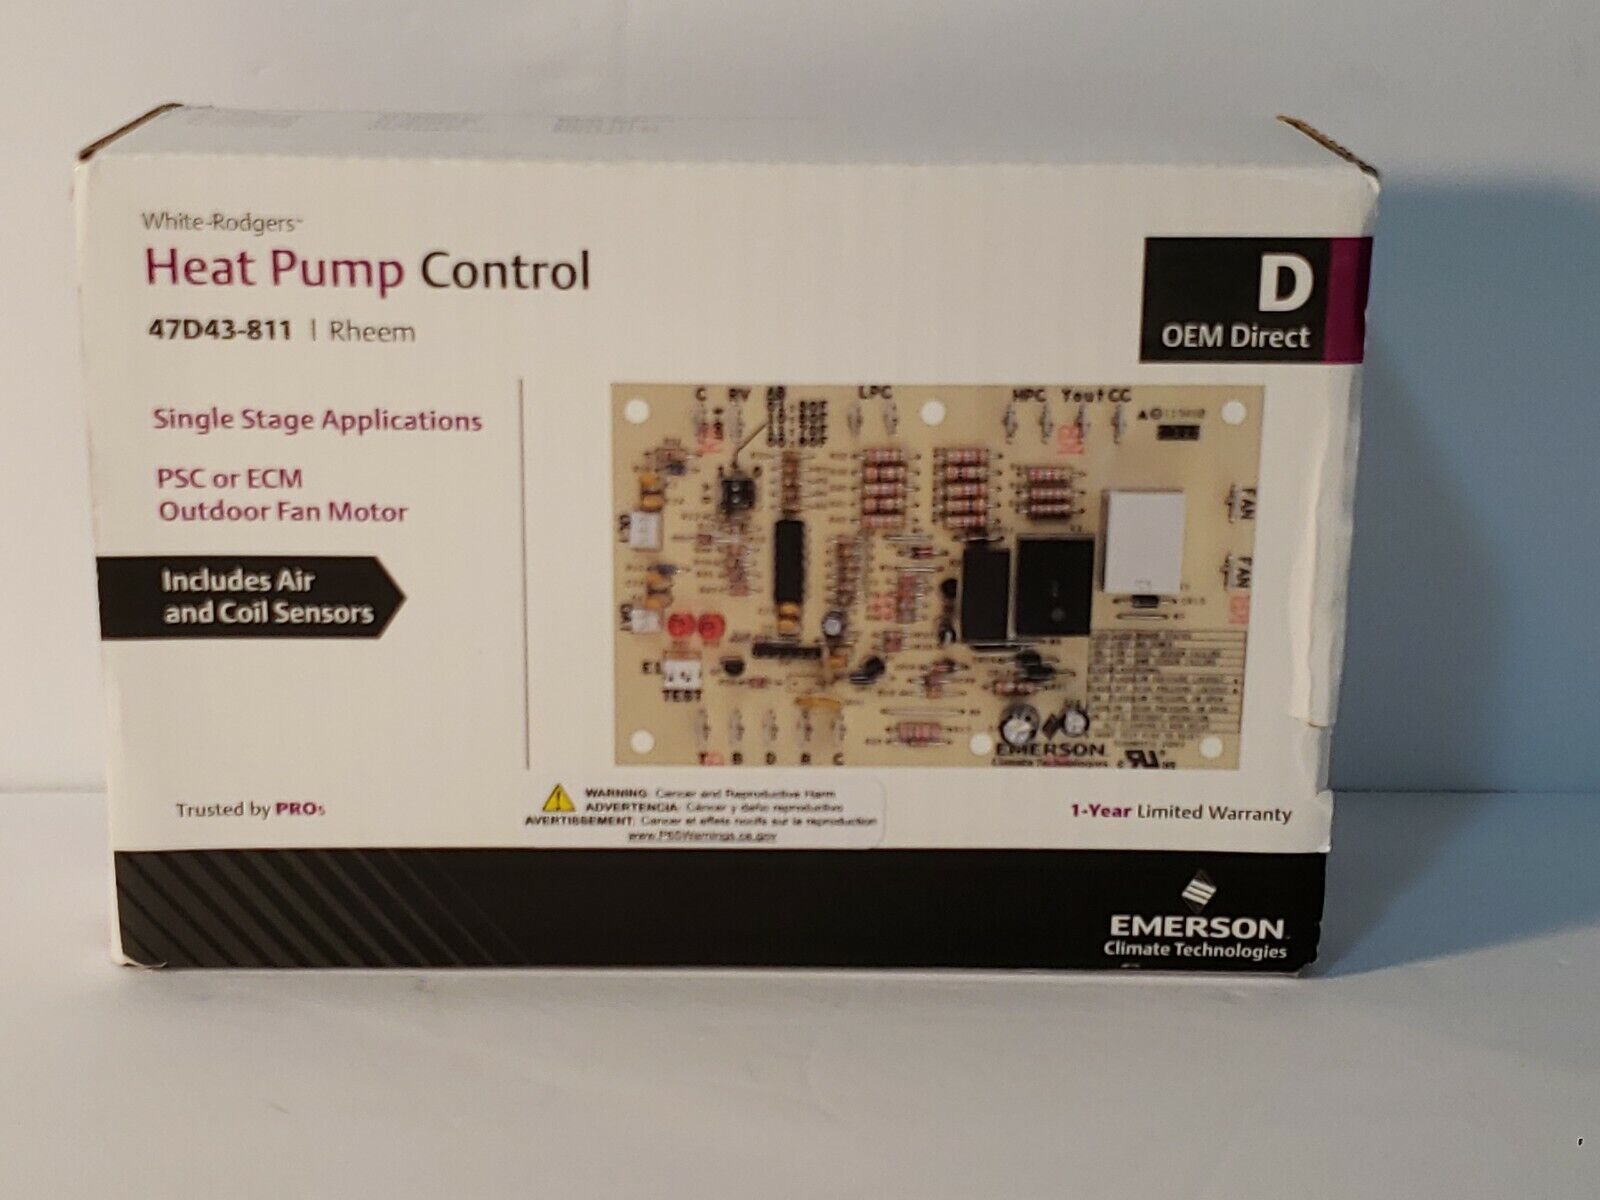 White Rodgers 47D43-811 Rheem Heat Pump Control Includes Air And Coil Sensors